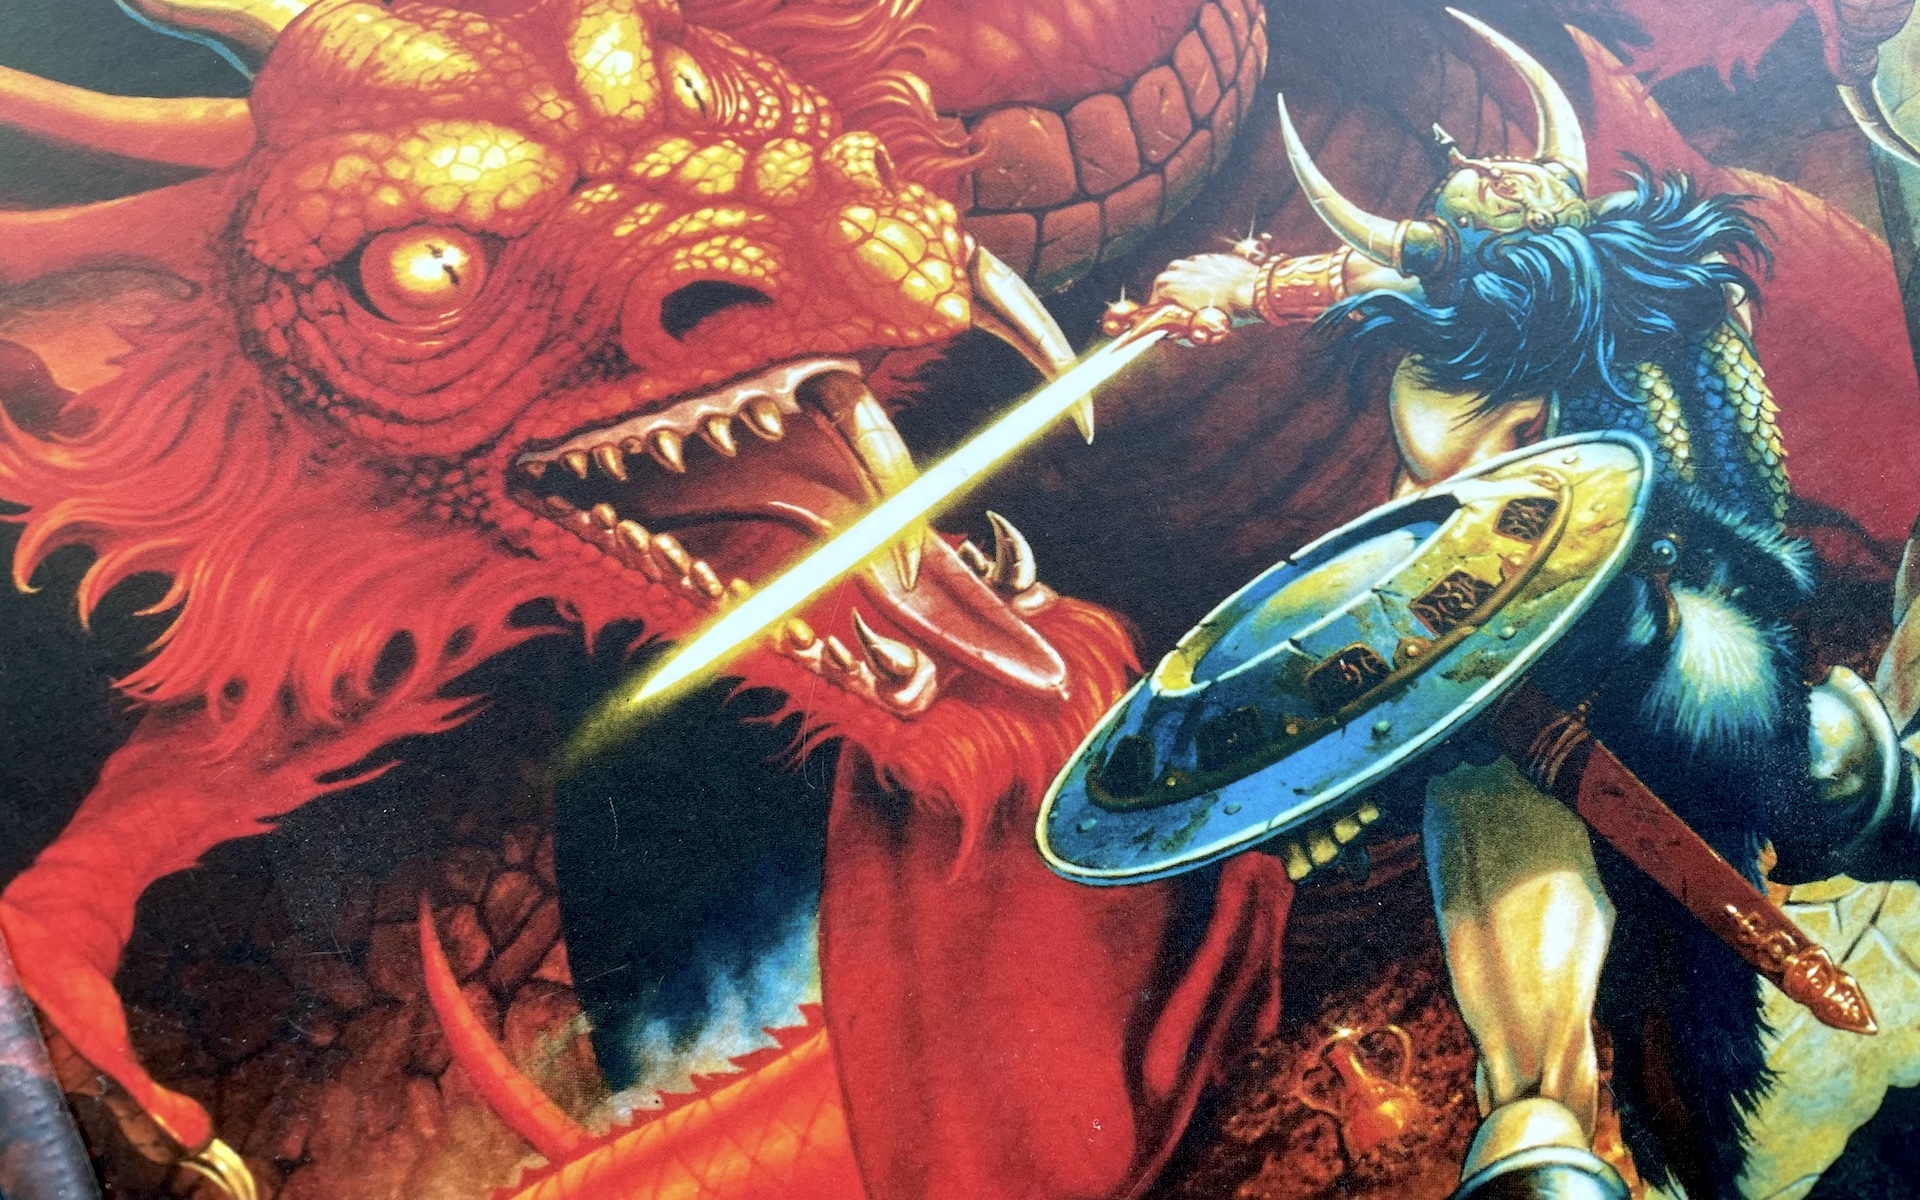 D&D Direct 2022: Watch today’s Dungeons & Dragons live stream here